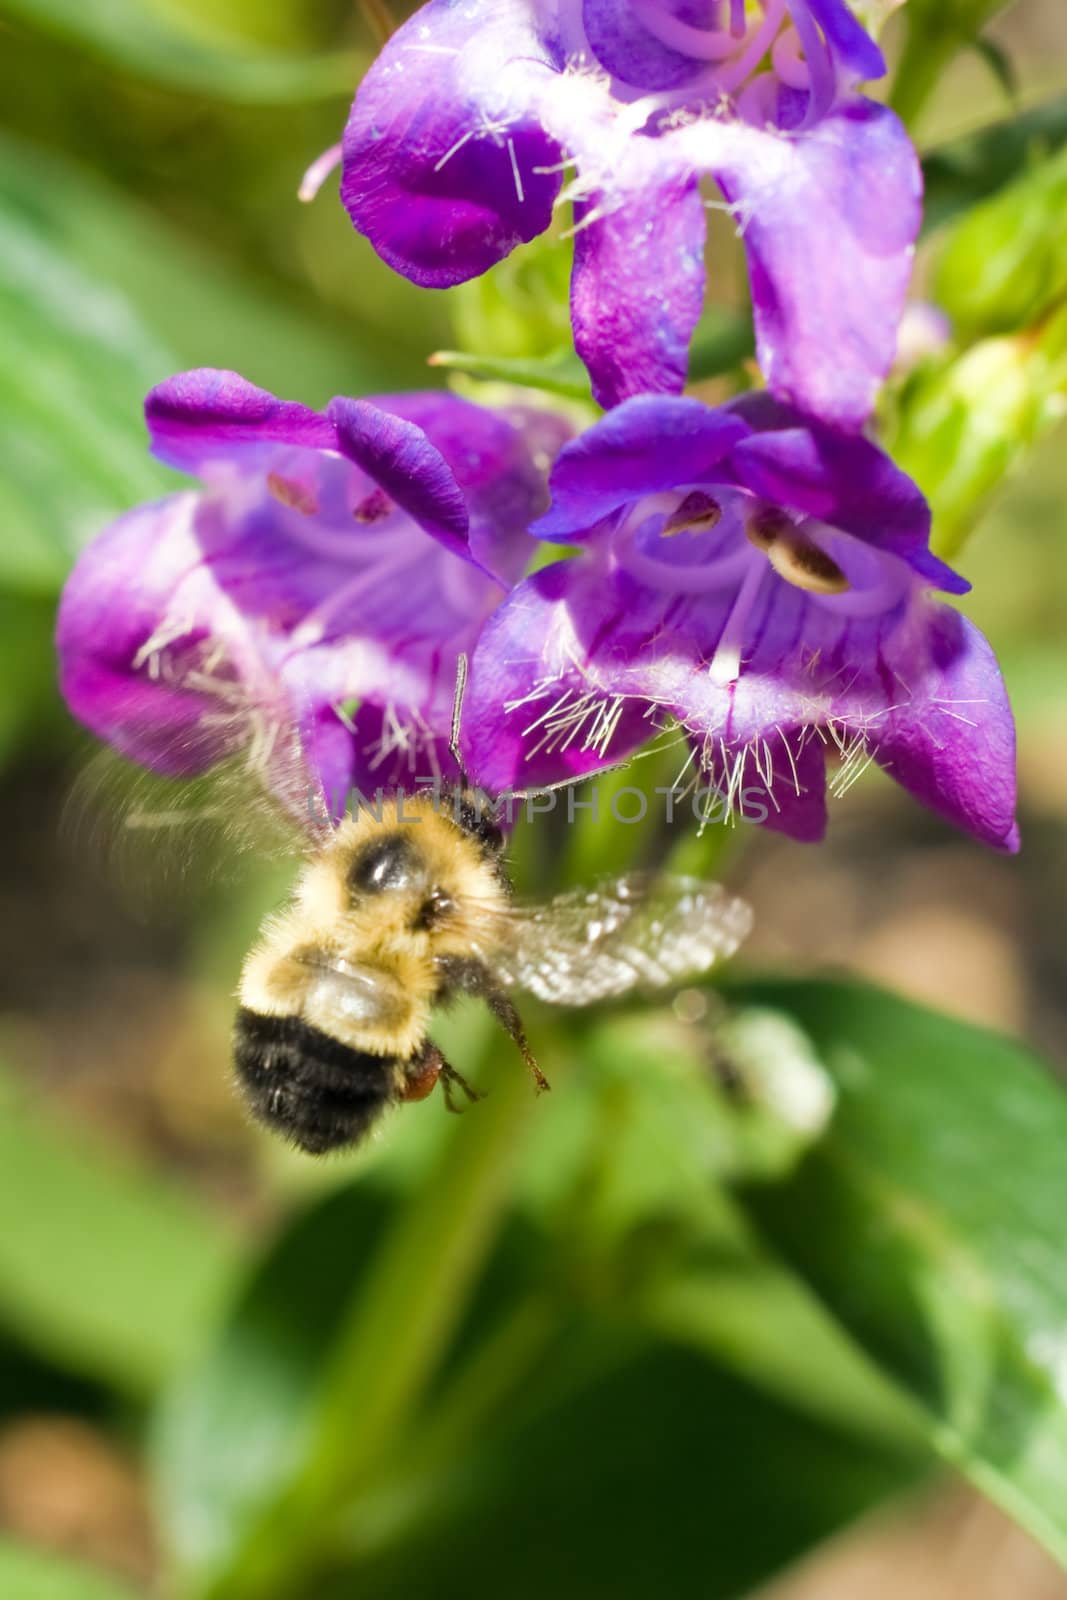 A bumble bee collecting pollen from a blue flower